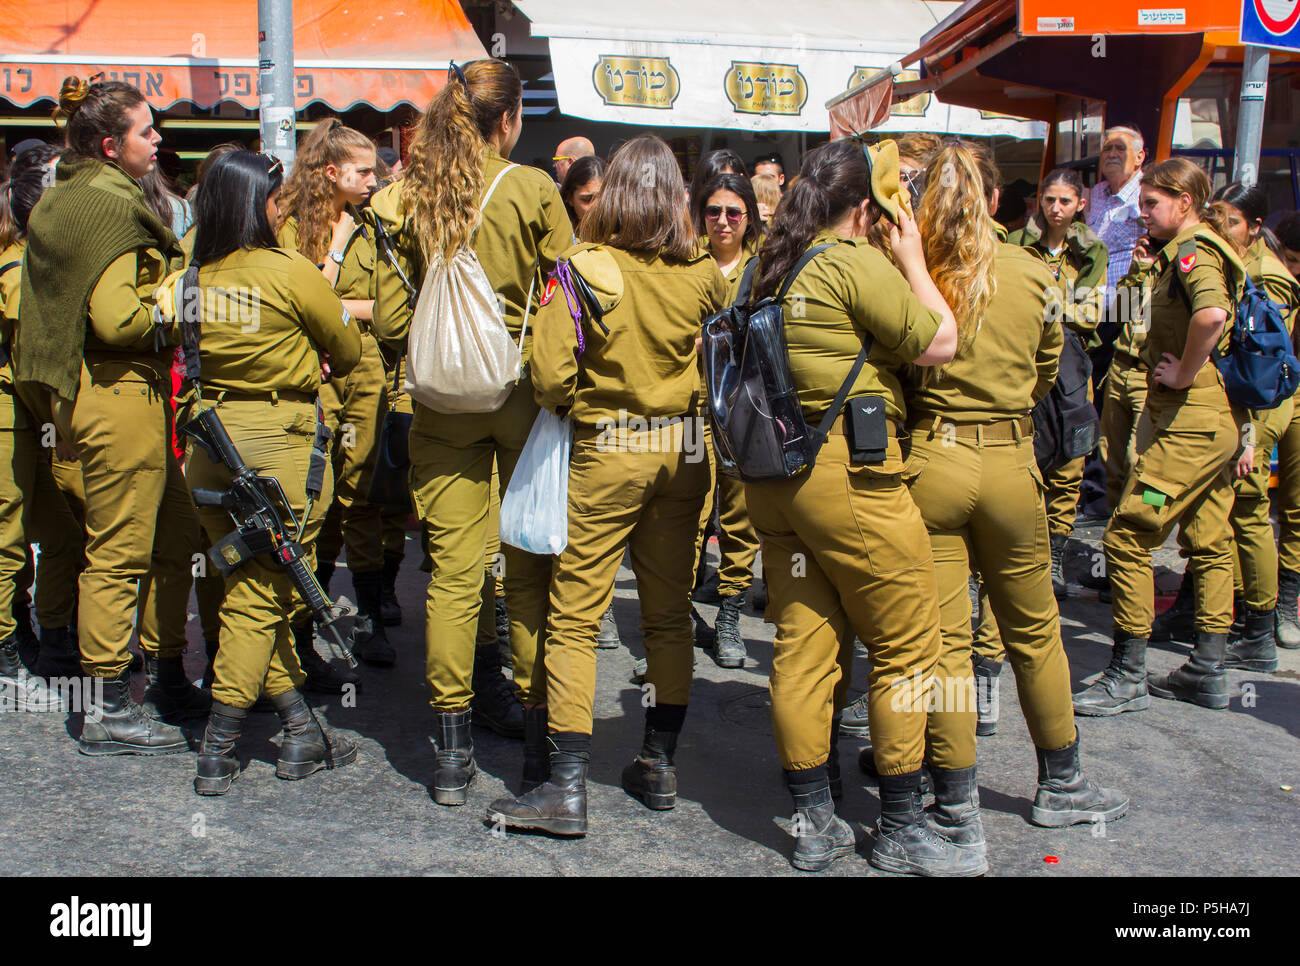 9 May 2018 A small group of off duty female Israeli Army conscripts with an armed guard laugh and chat together at the Mahane Yehuda market Jerusalem Stock Photo